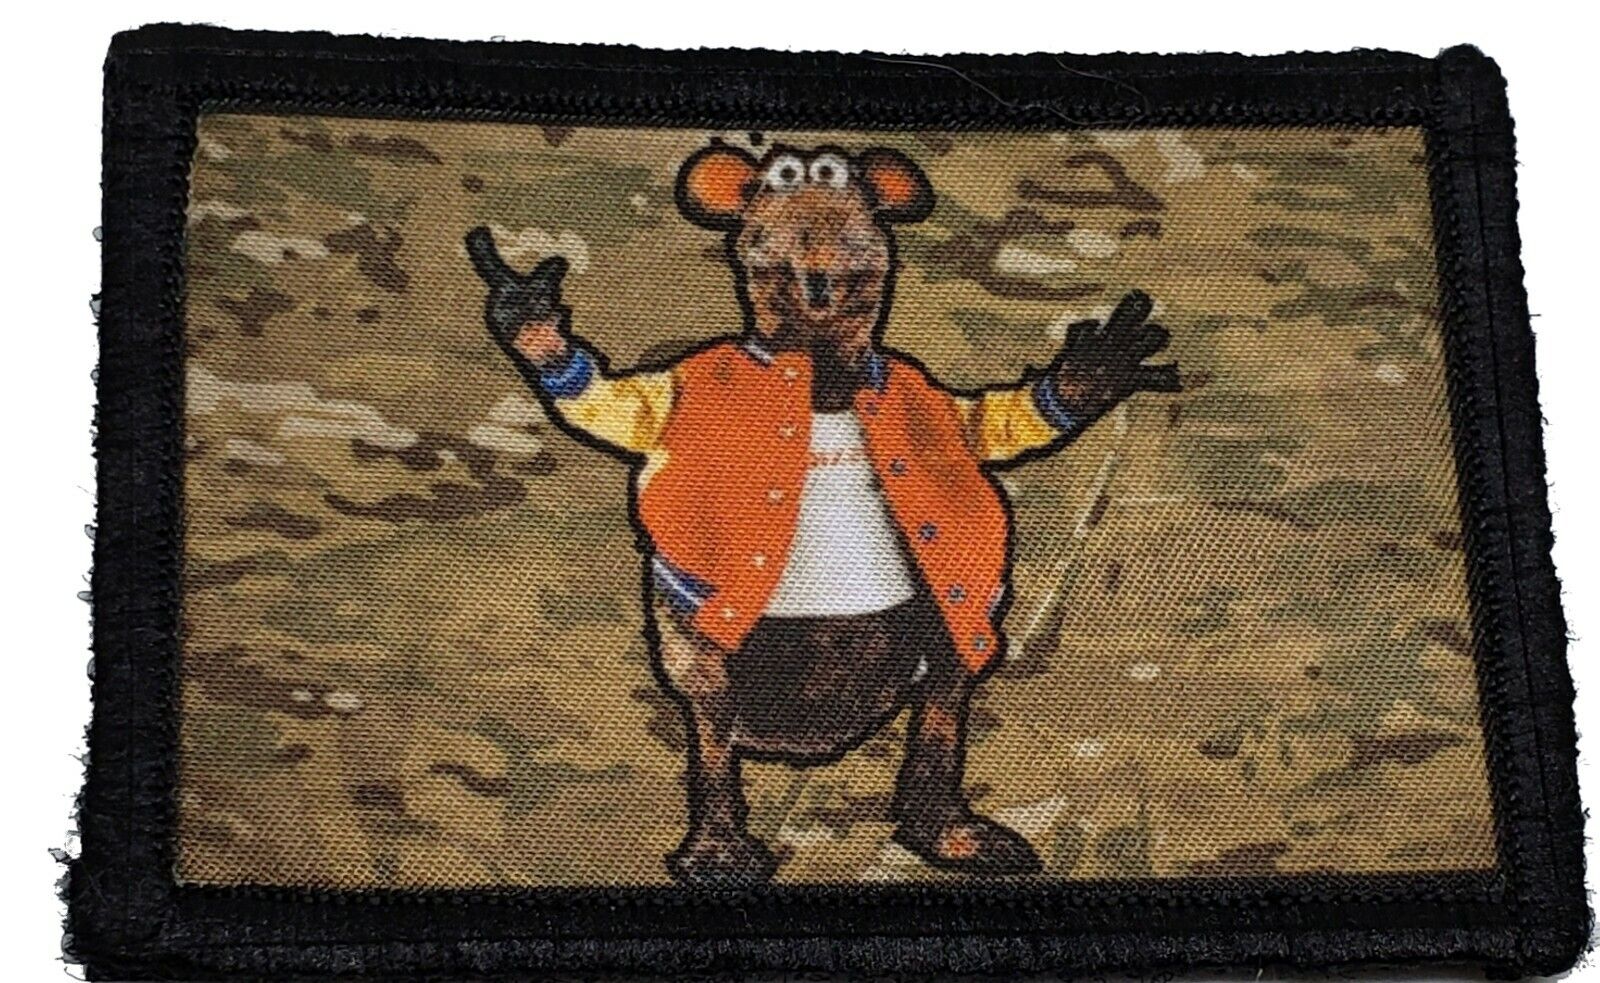  Rizzo the Rat Multicam  Morale Patch  Funny Military Army Tactical 